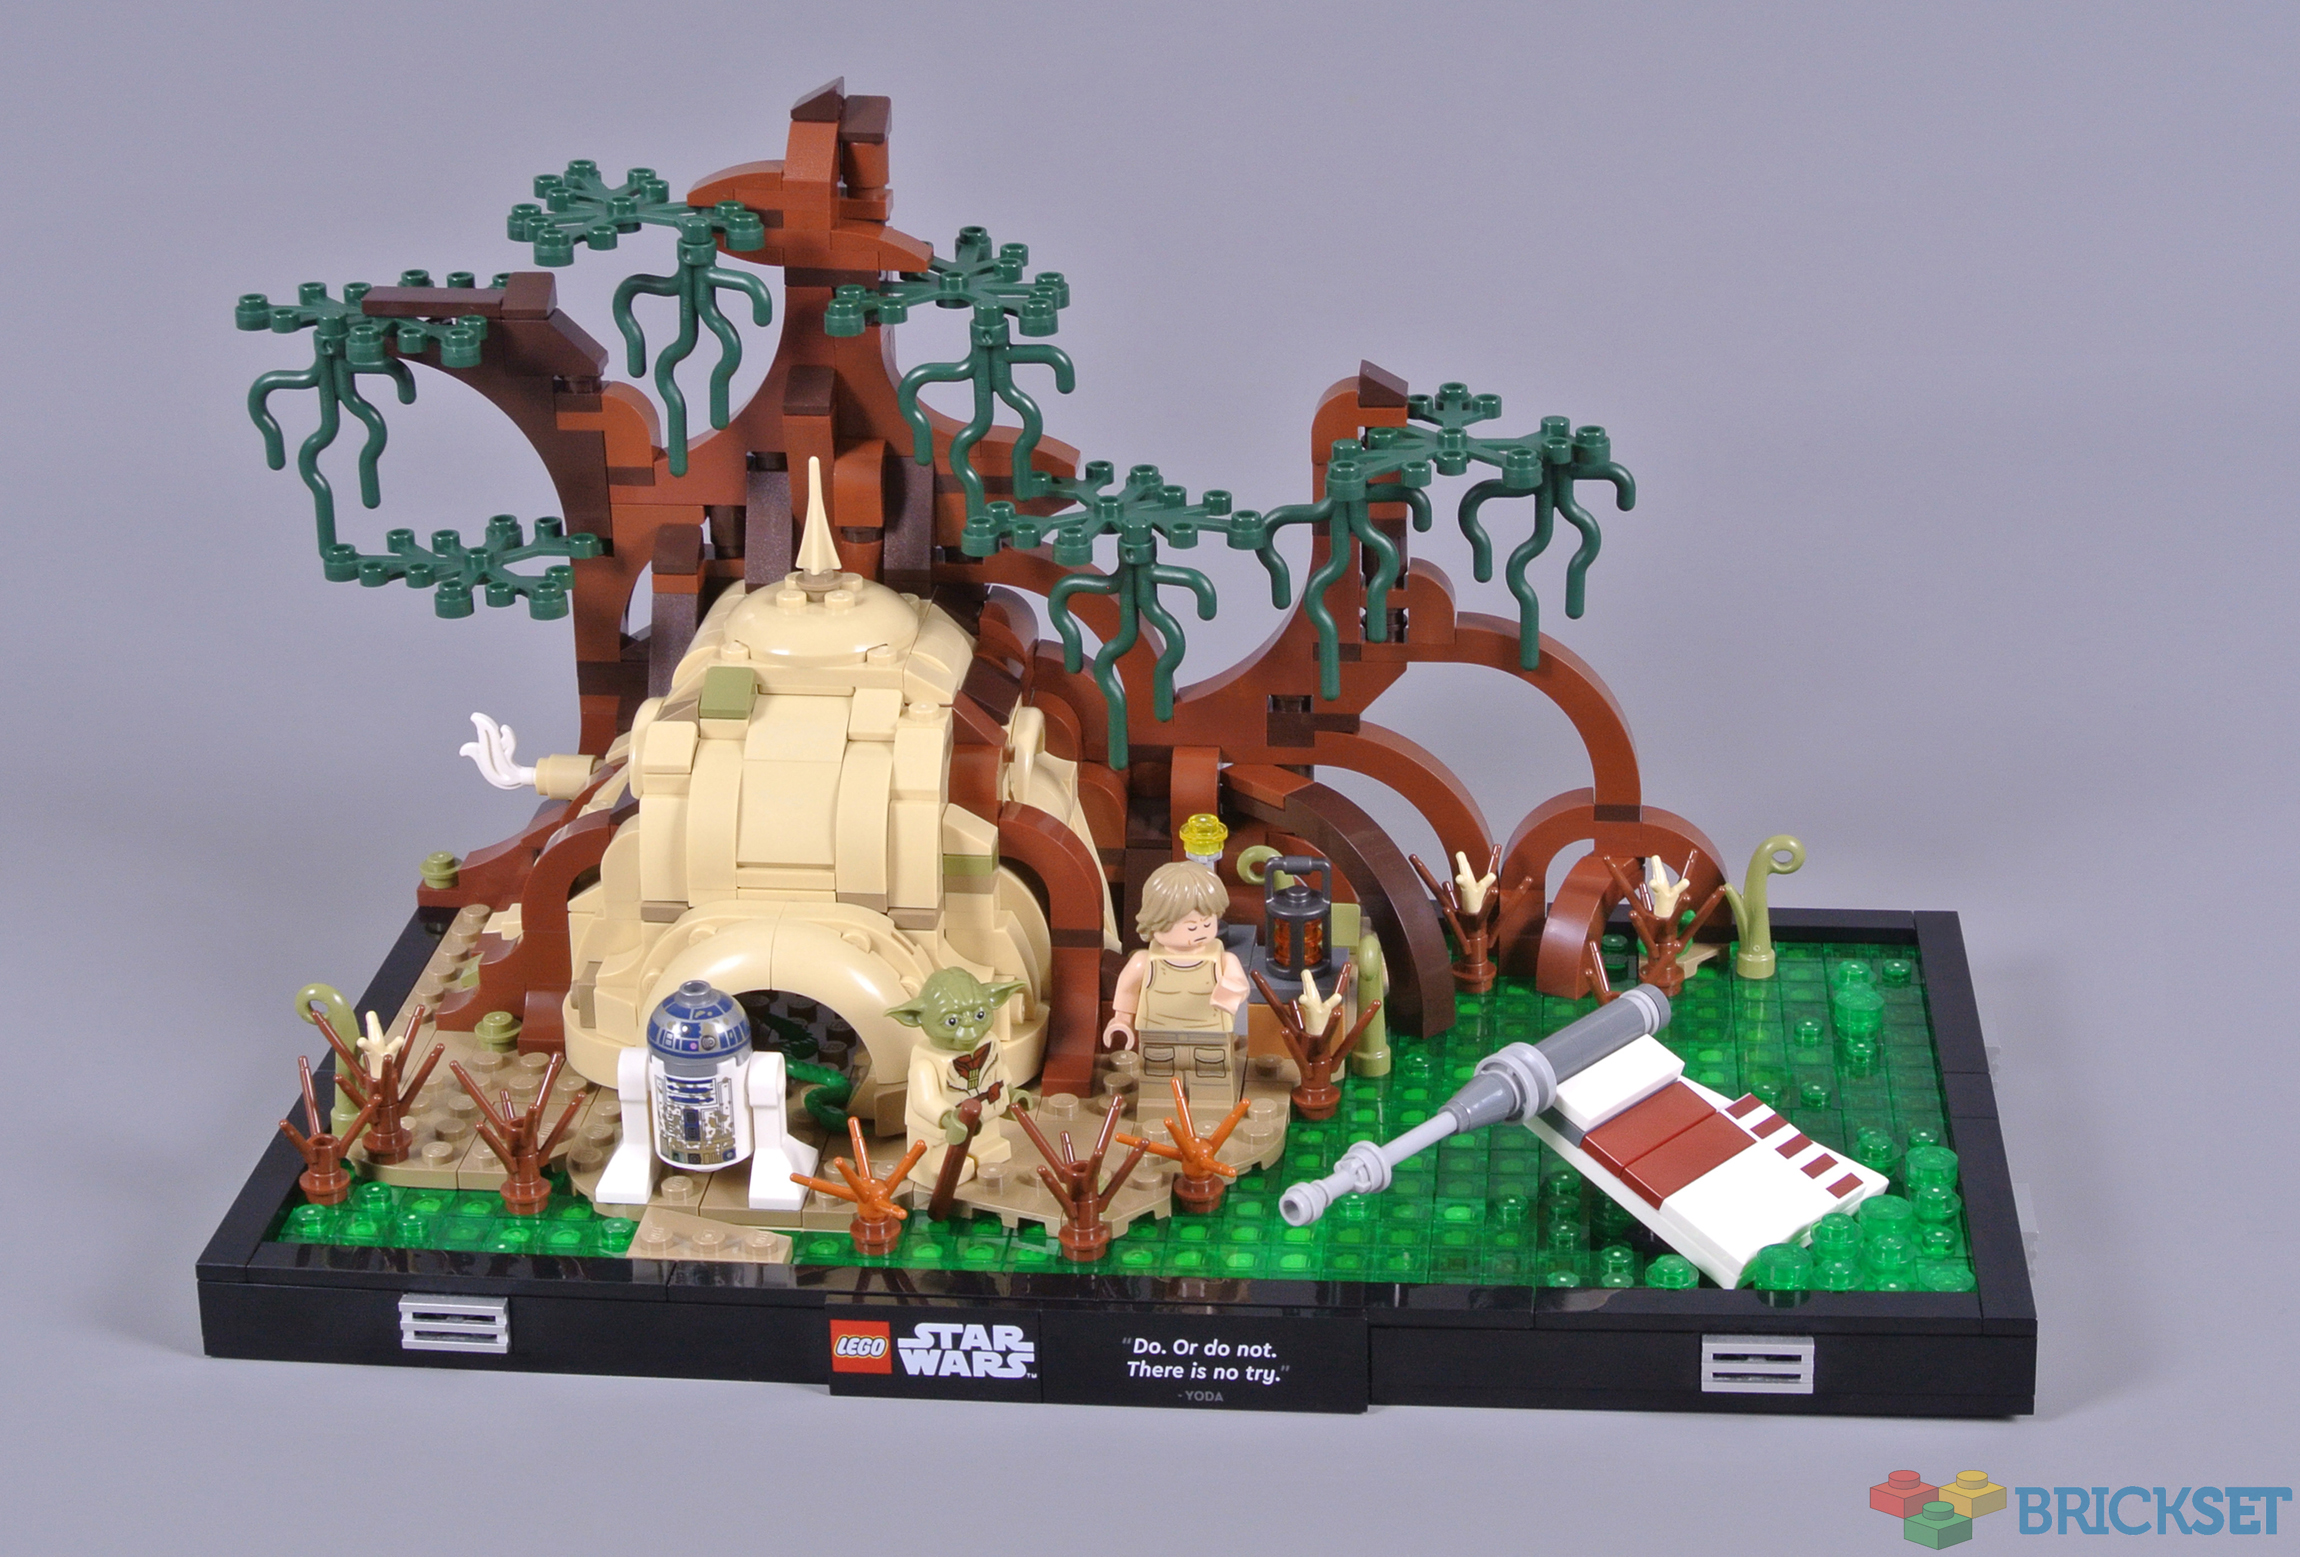 LEGO® Star Wars review: 75329 Death Star Trench Run, 75330 Dagobah